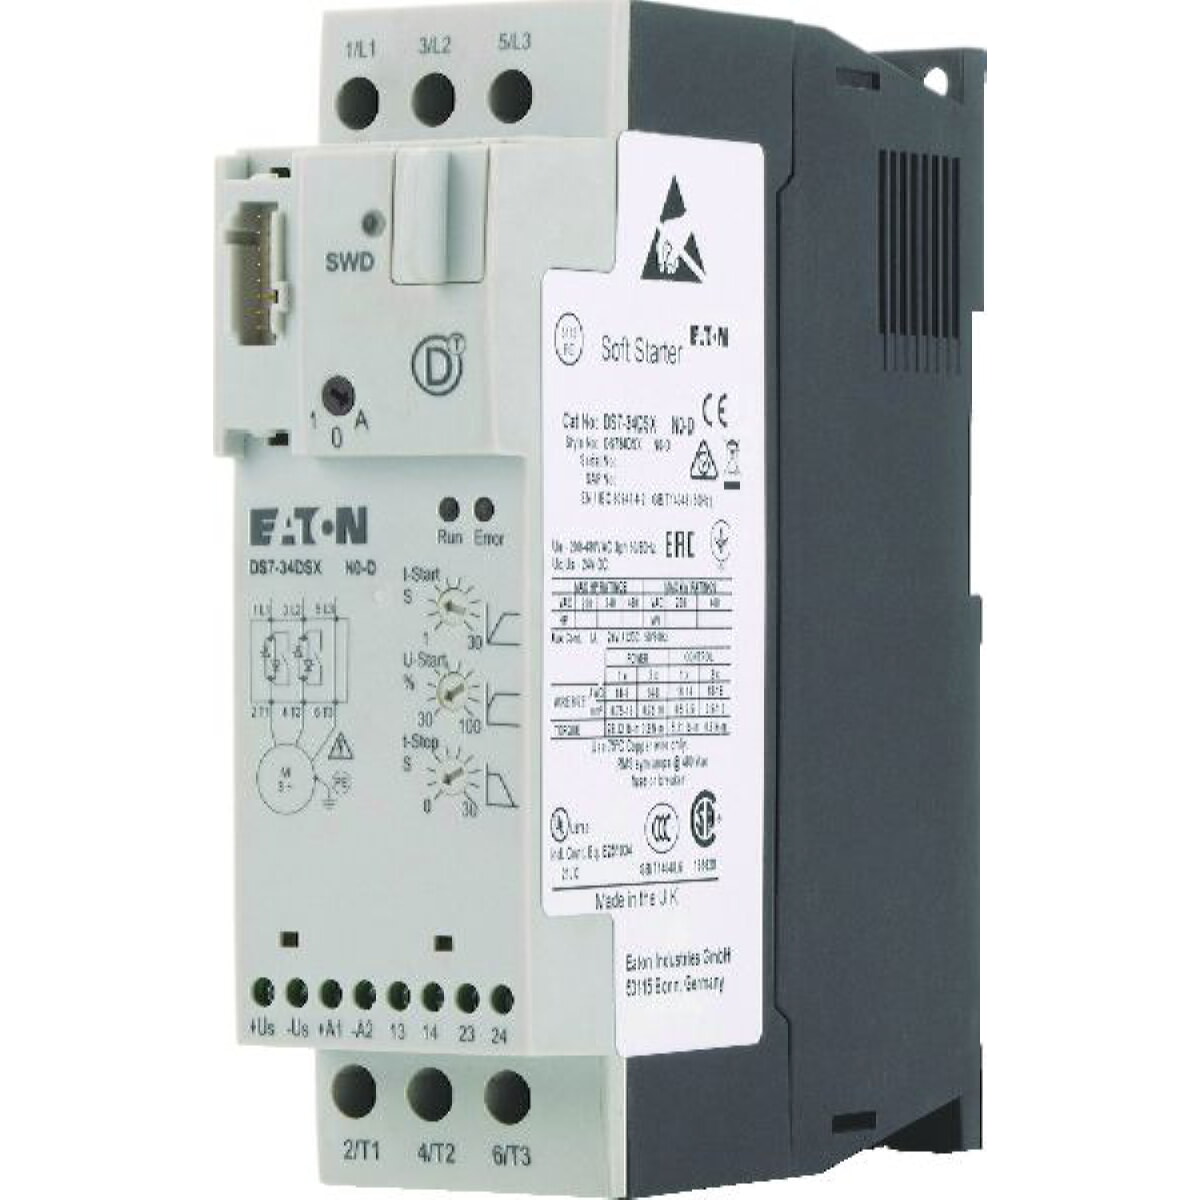 EATON Electric Softstarter DS7-34DSX016N0-D